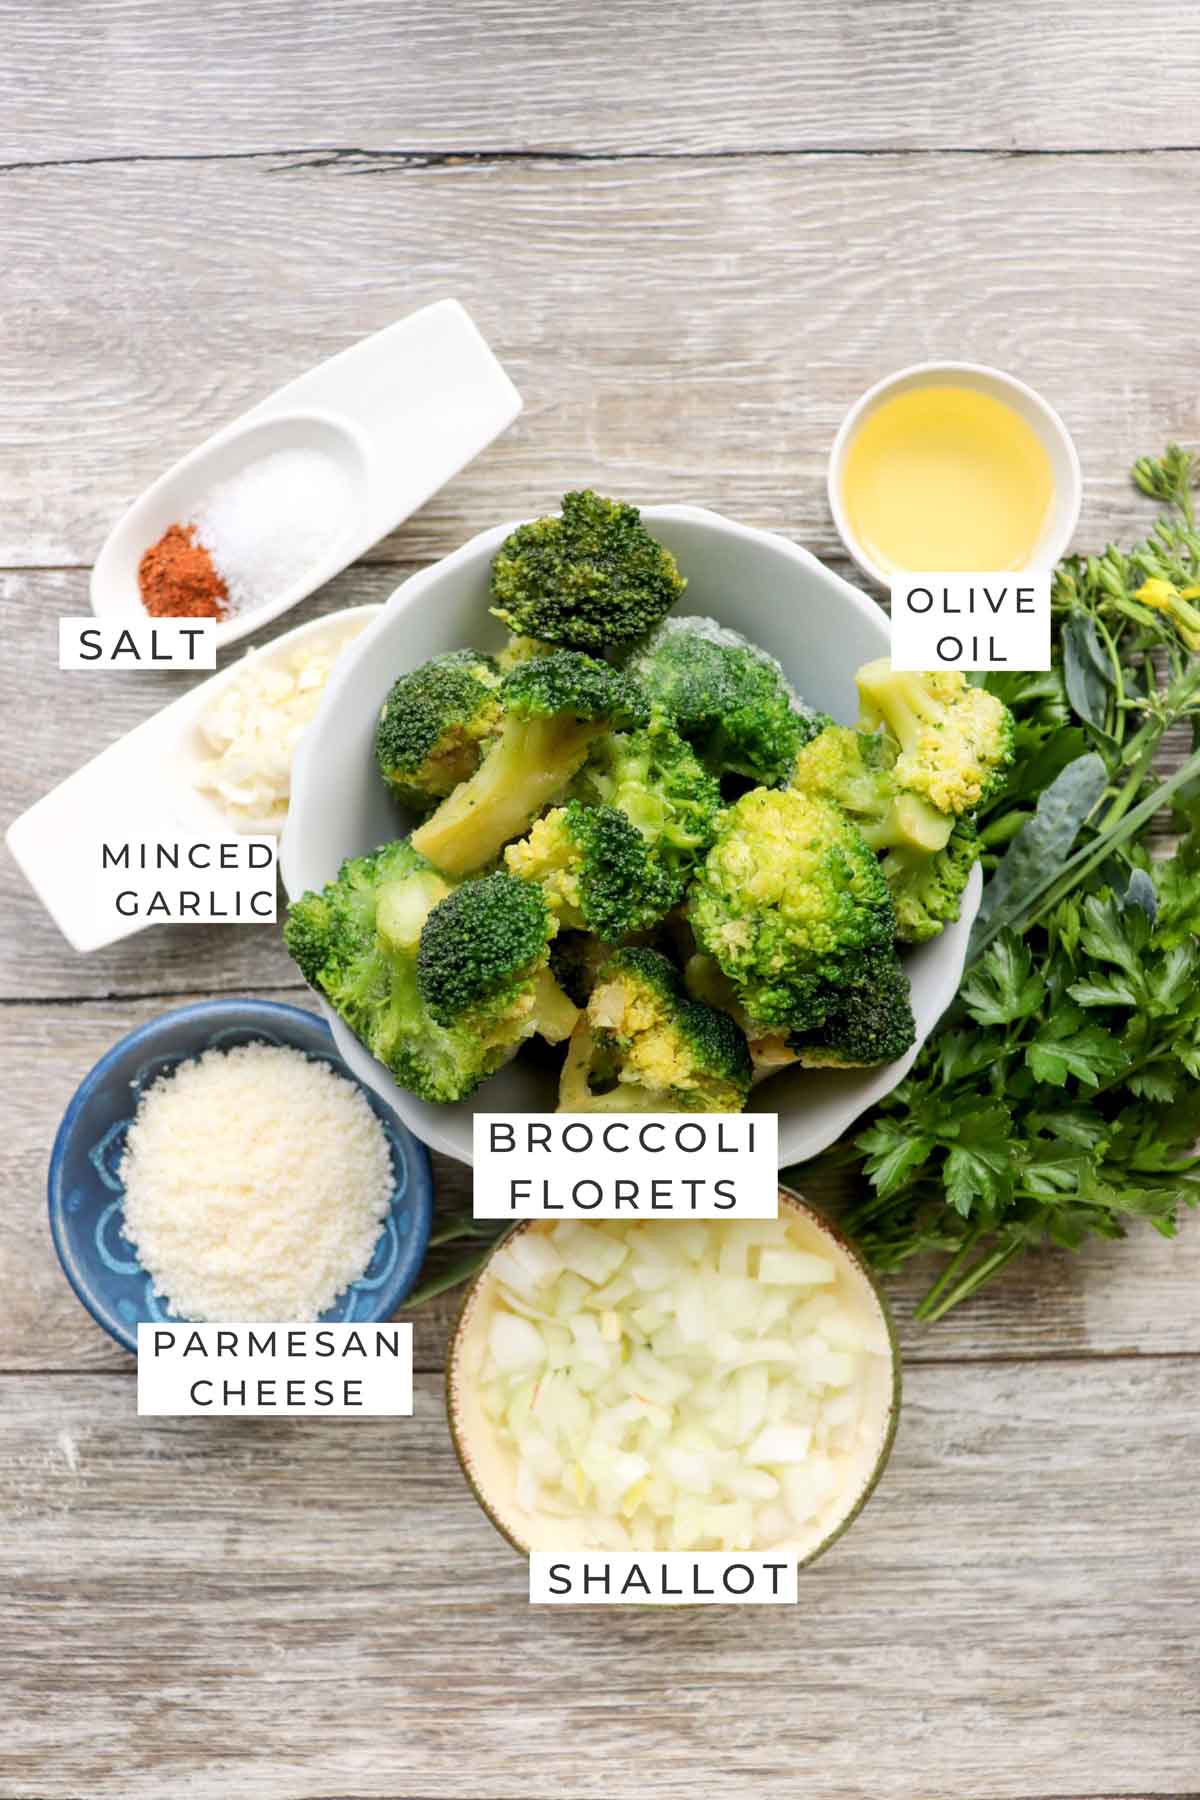 Labeled ingredients for the broccoli.